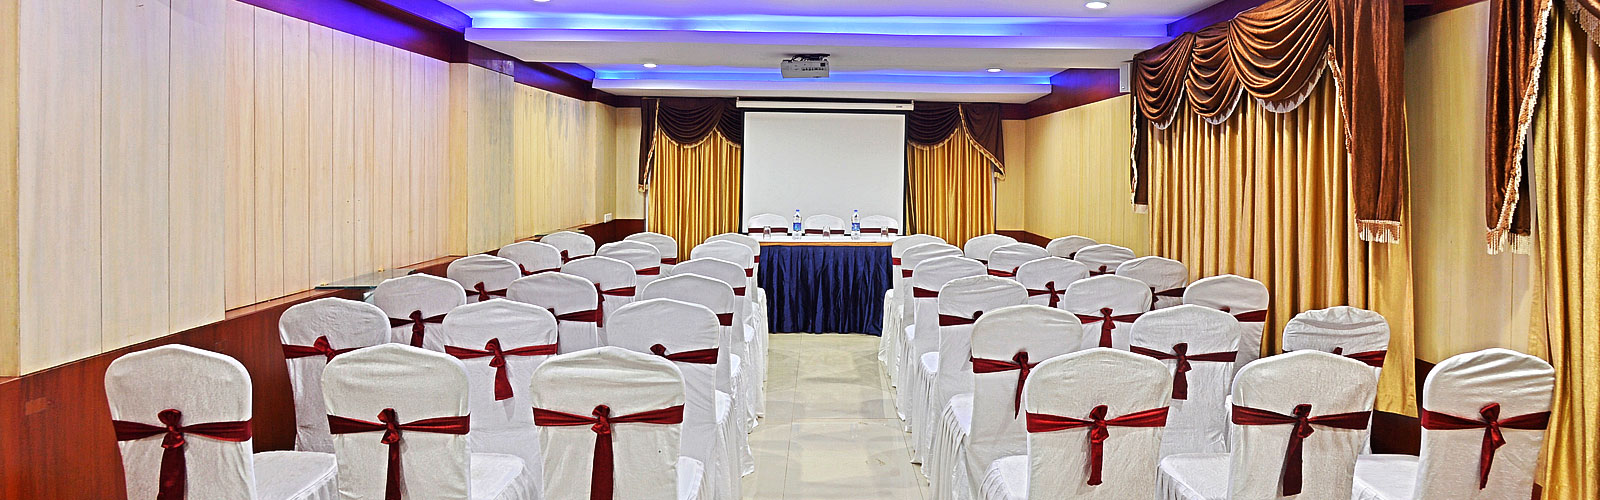 ooty hotel conference hall